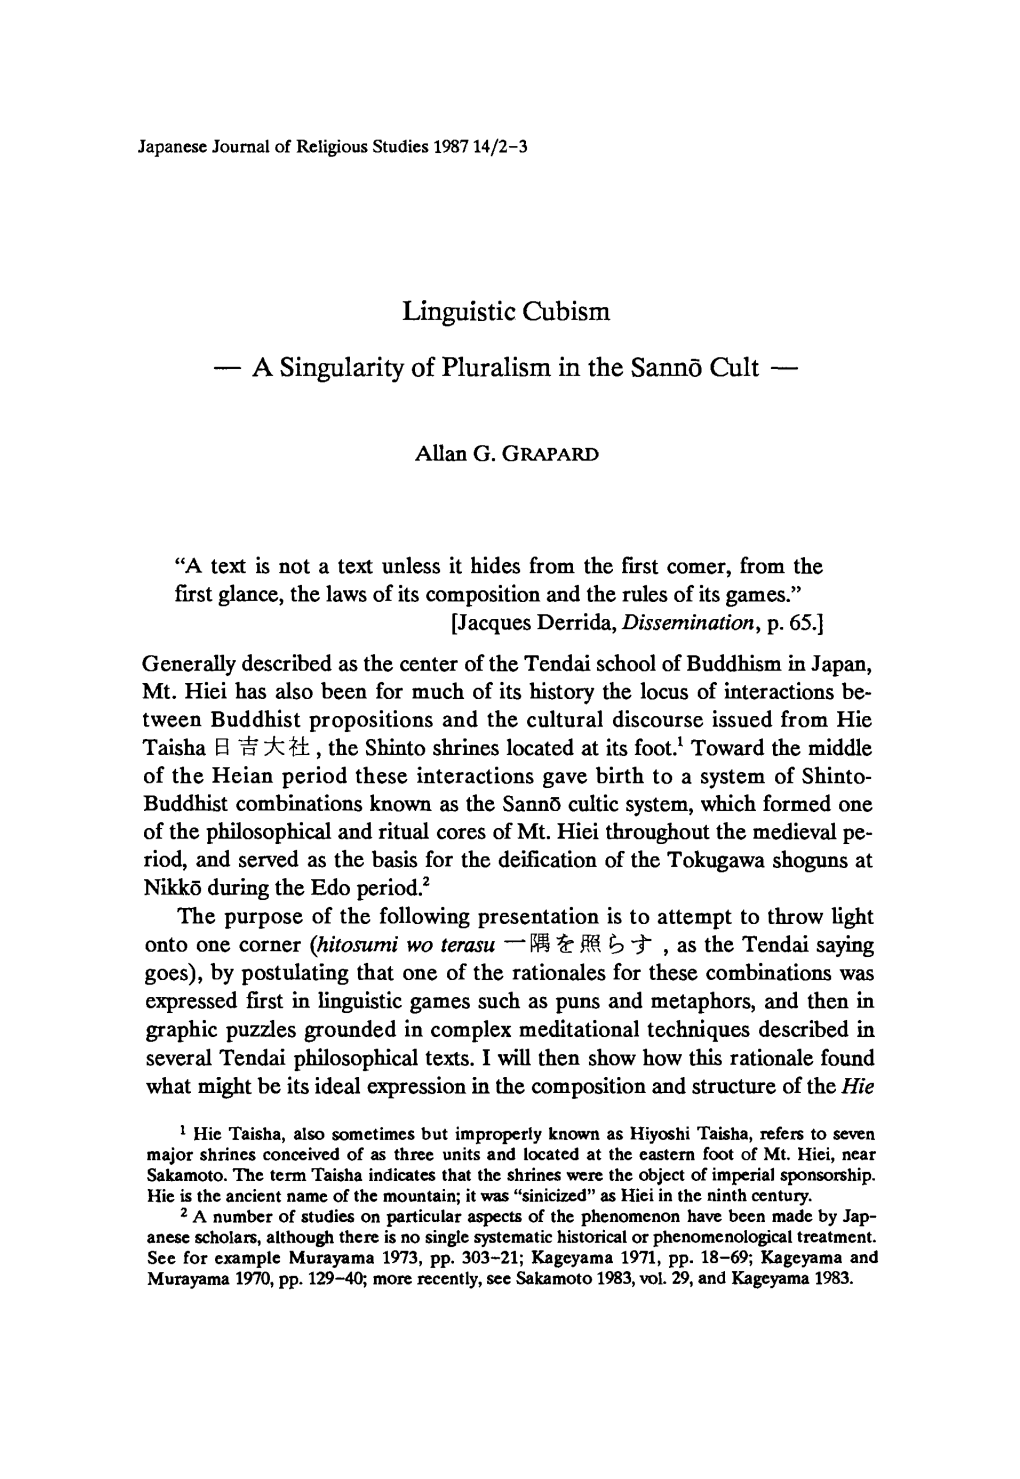 Linguistic Cubism — a Singularity of Pluralism in the Sanno Cult 一